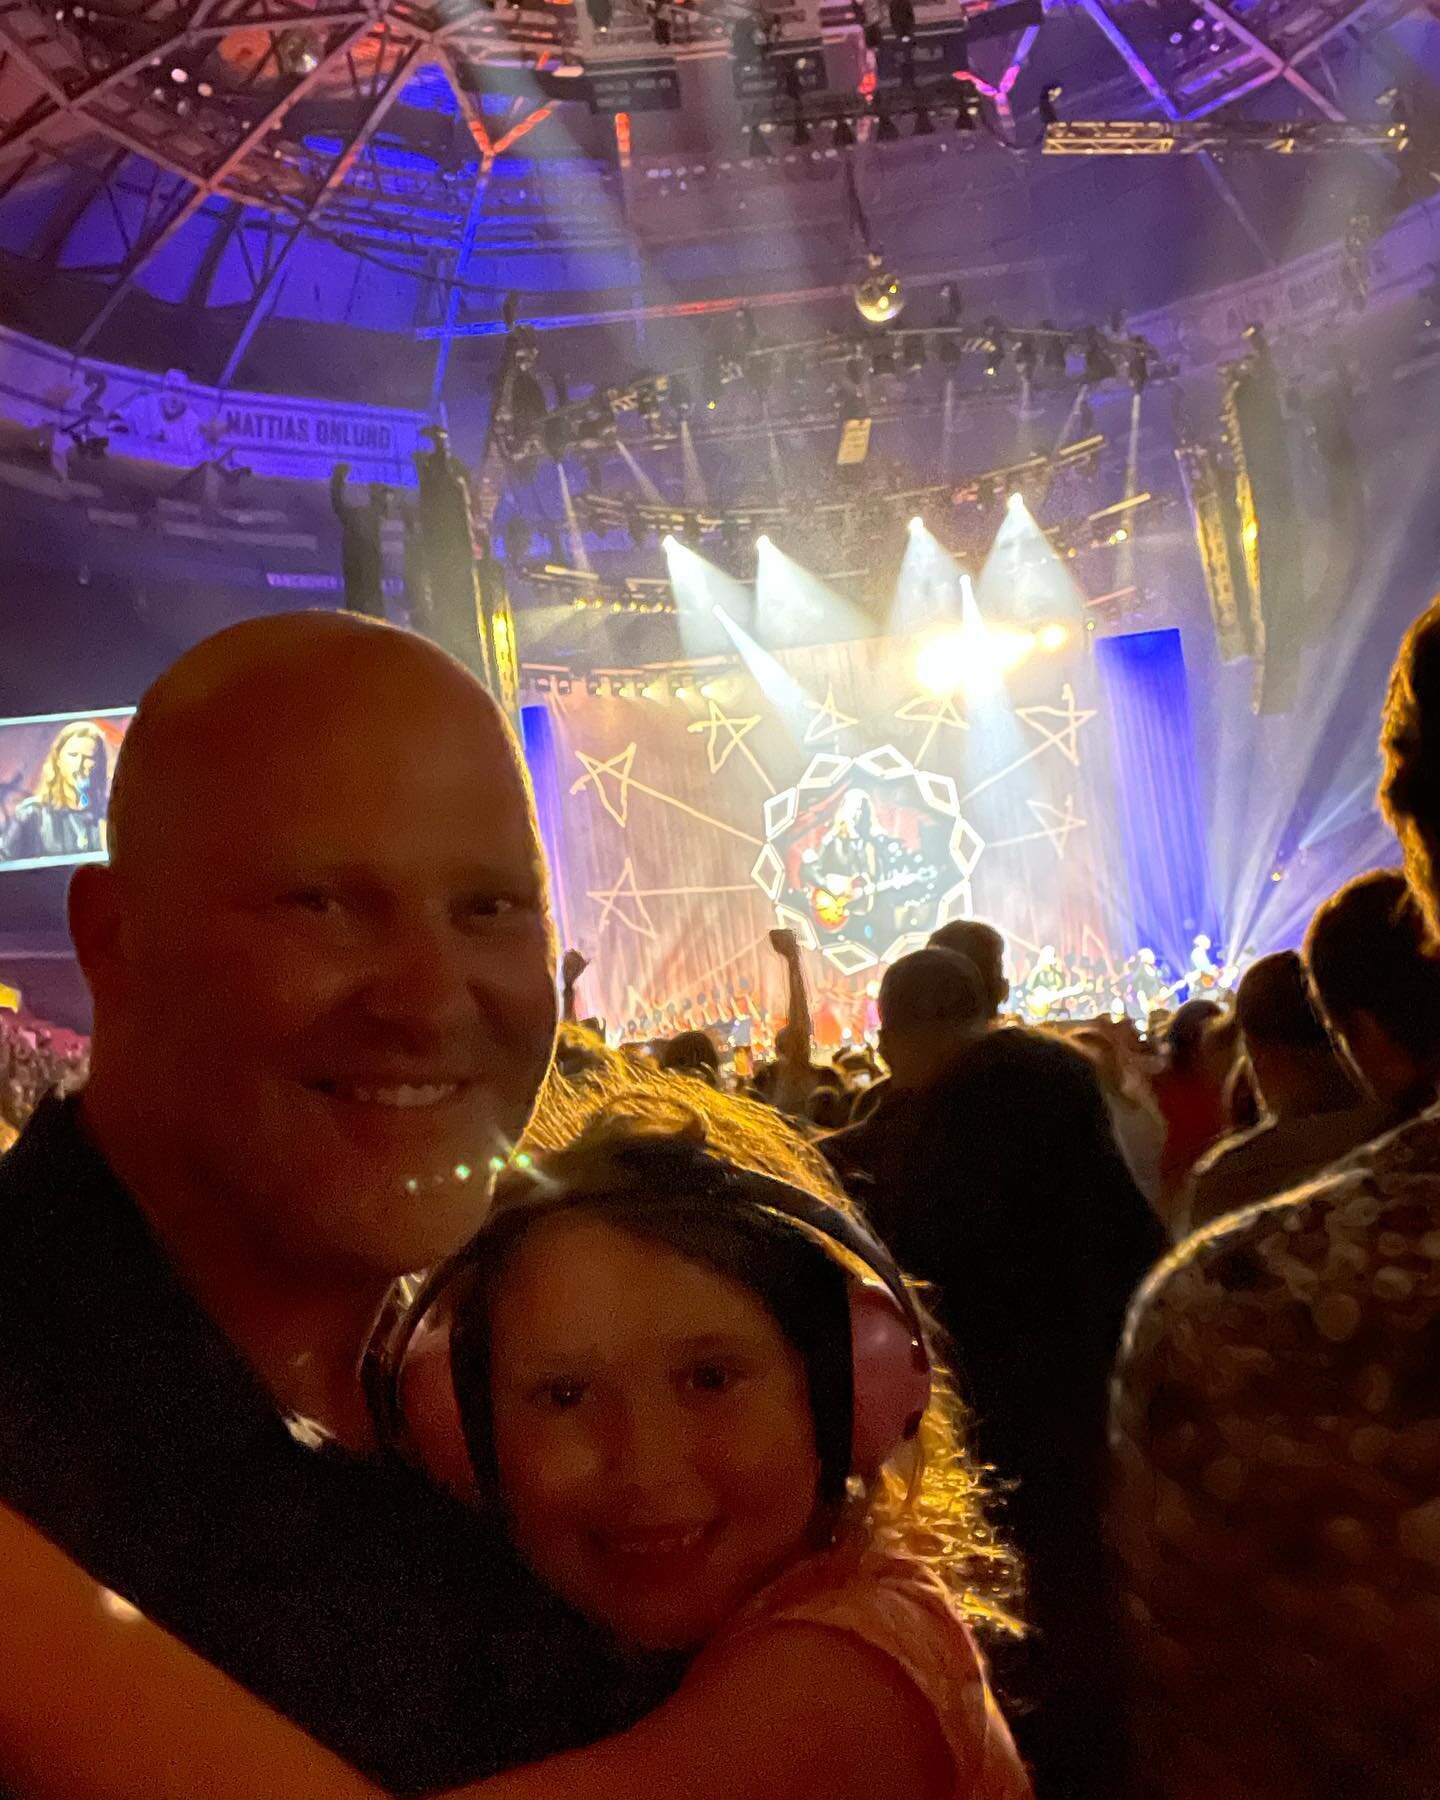 Lumineers!!! What a memorable daddy-daughter date night! Thanks so much @alicornford!